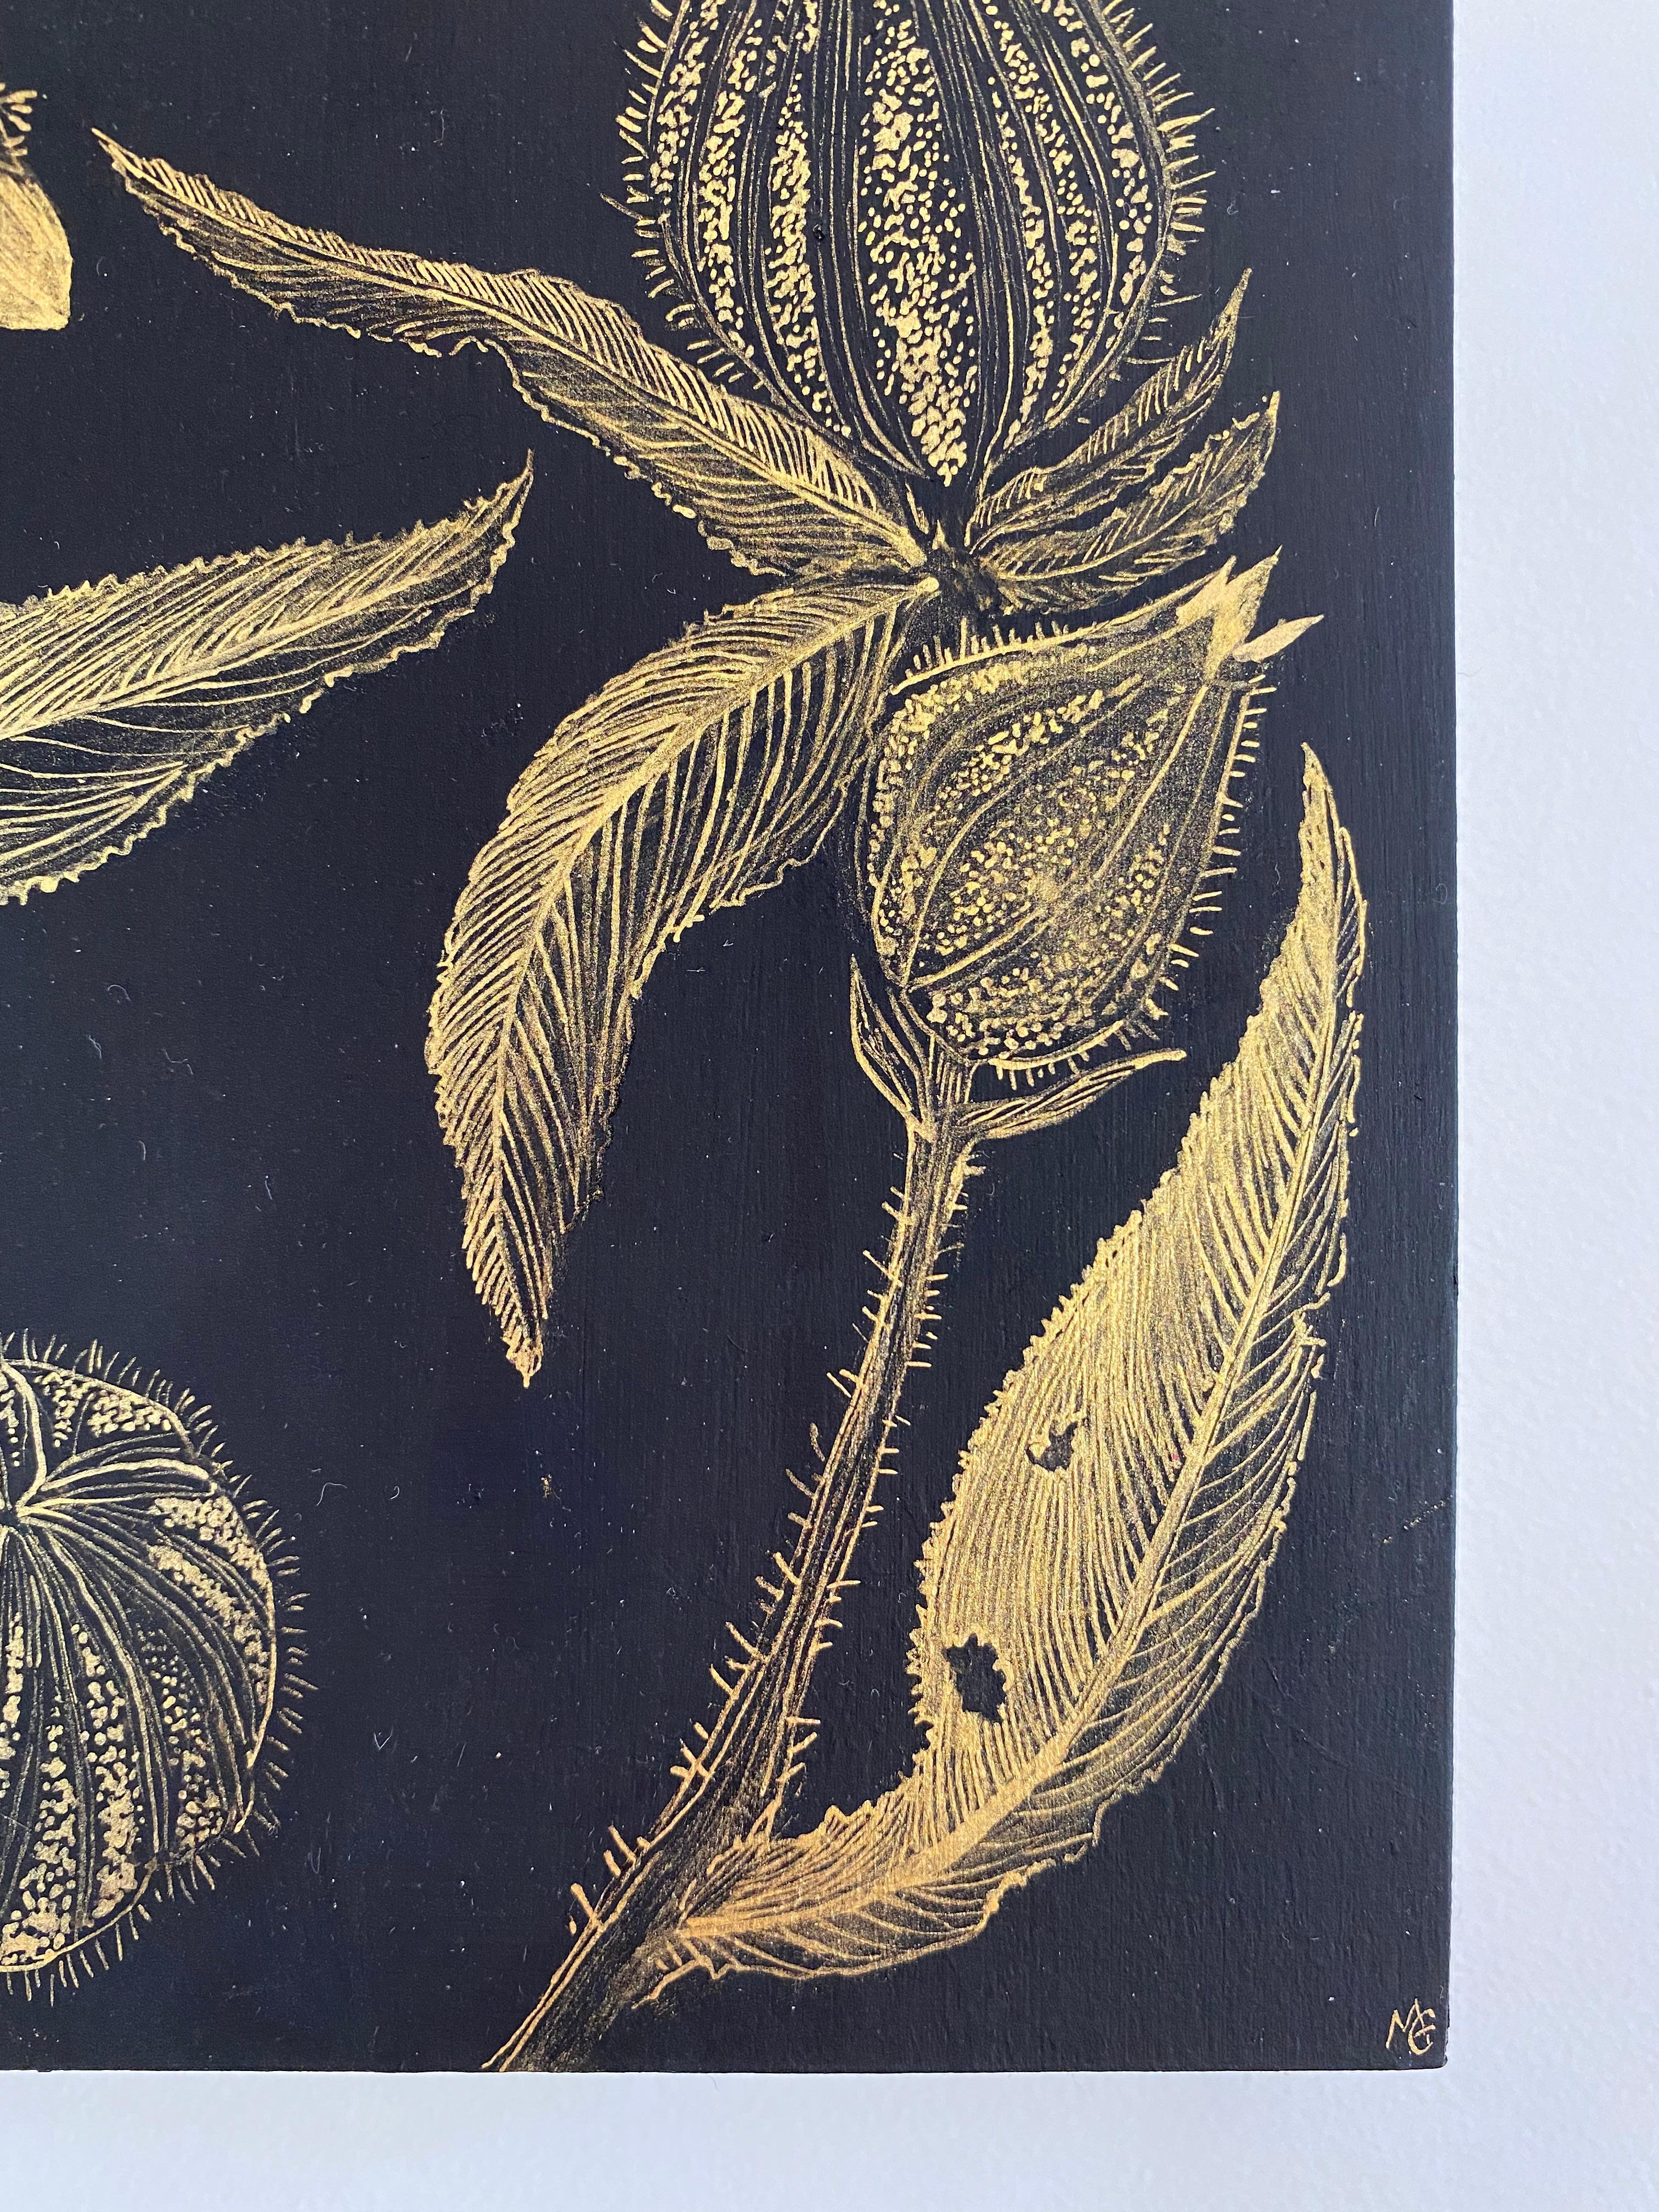 Marshmallow Two, Gold Flowers, Leaves Stem, Metallic Botanical Painting on Black For Sale 3